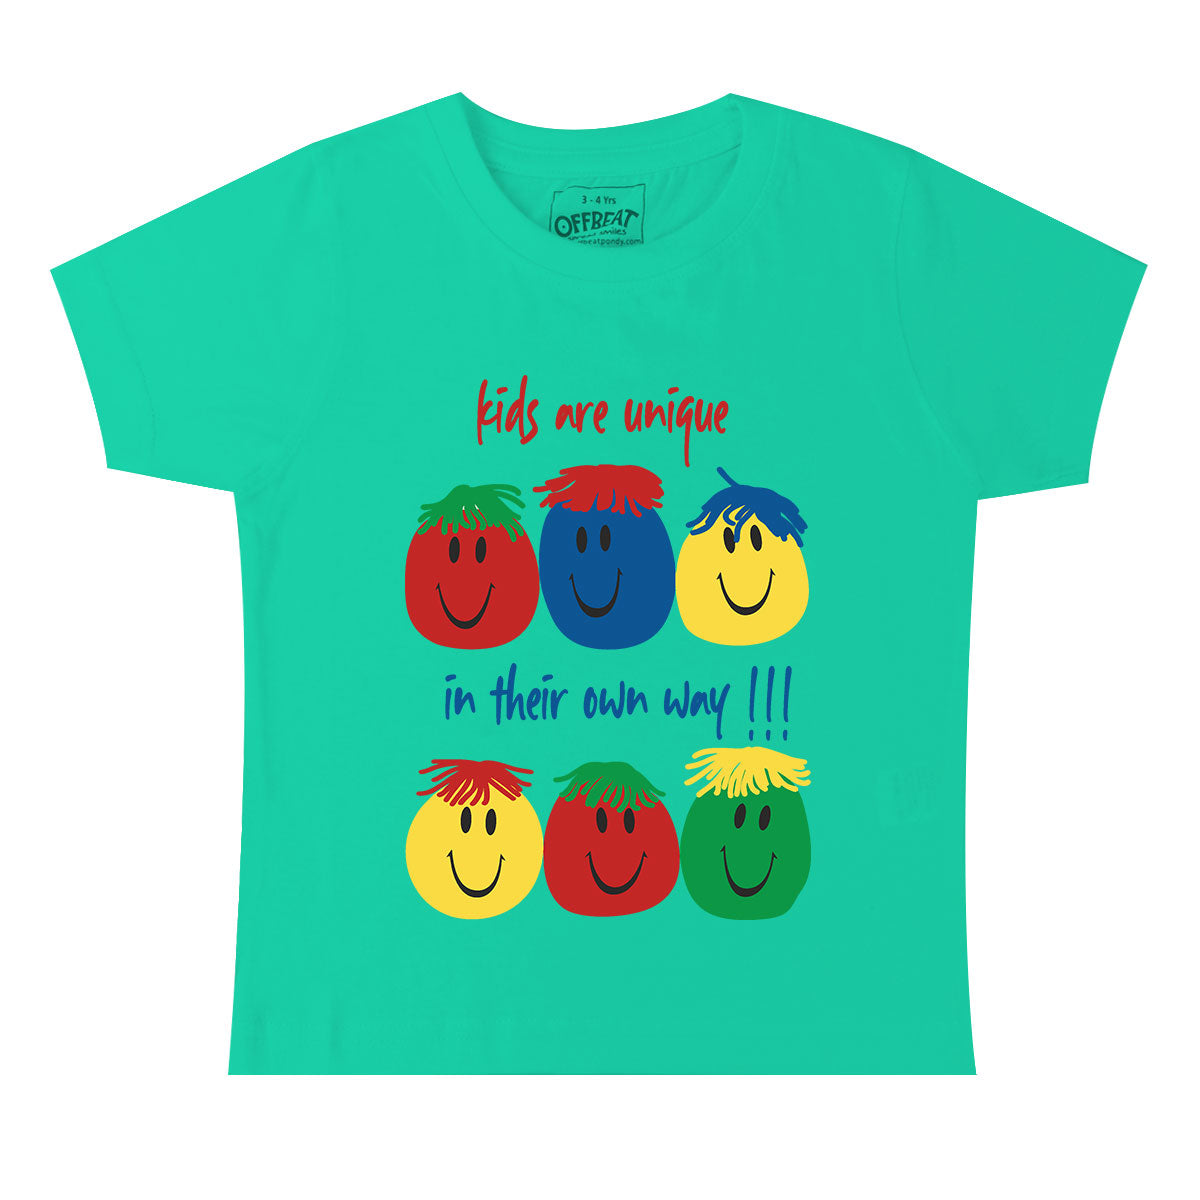 Will Check - Premium Round Neck Cotton Tees for Kids - Sky Blue And Sea Green